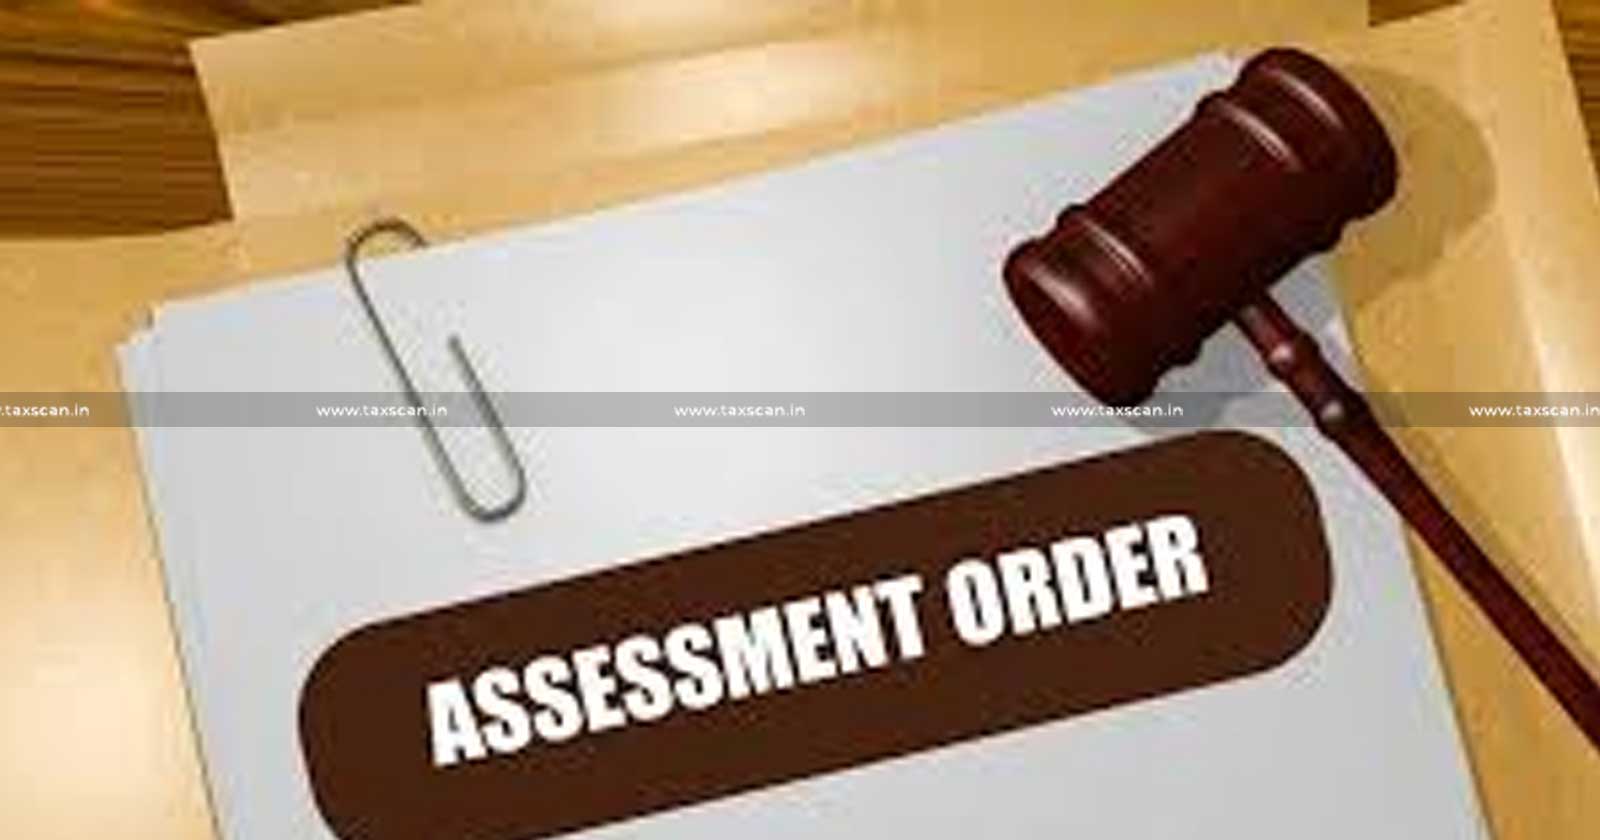 No Addition - Addition - Income Tax Act - Income Tax Act as assessee acknowledged liability and reflected the same in its books of account assessee books of account - ITAT - income tax - taxscan